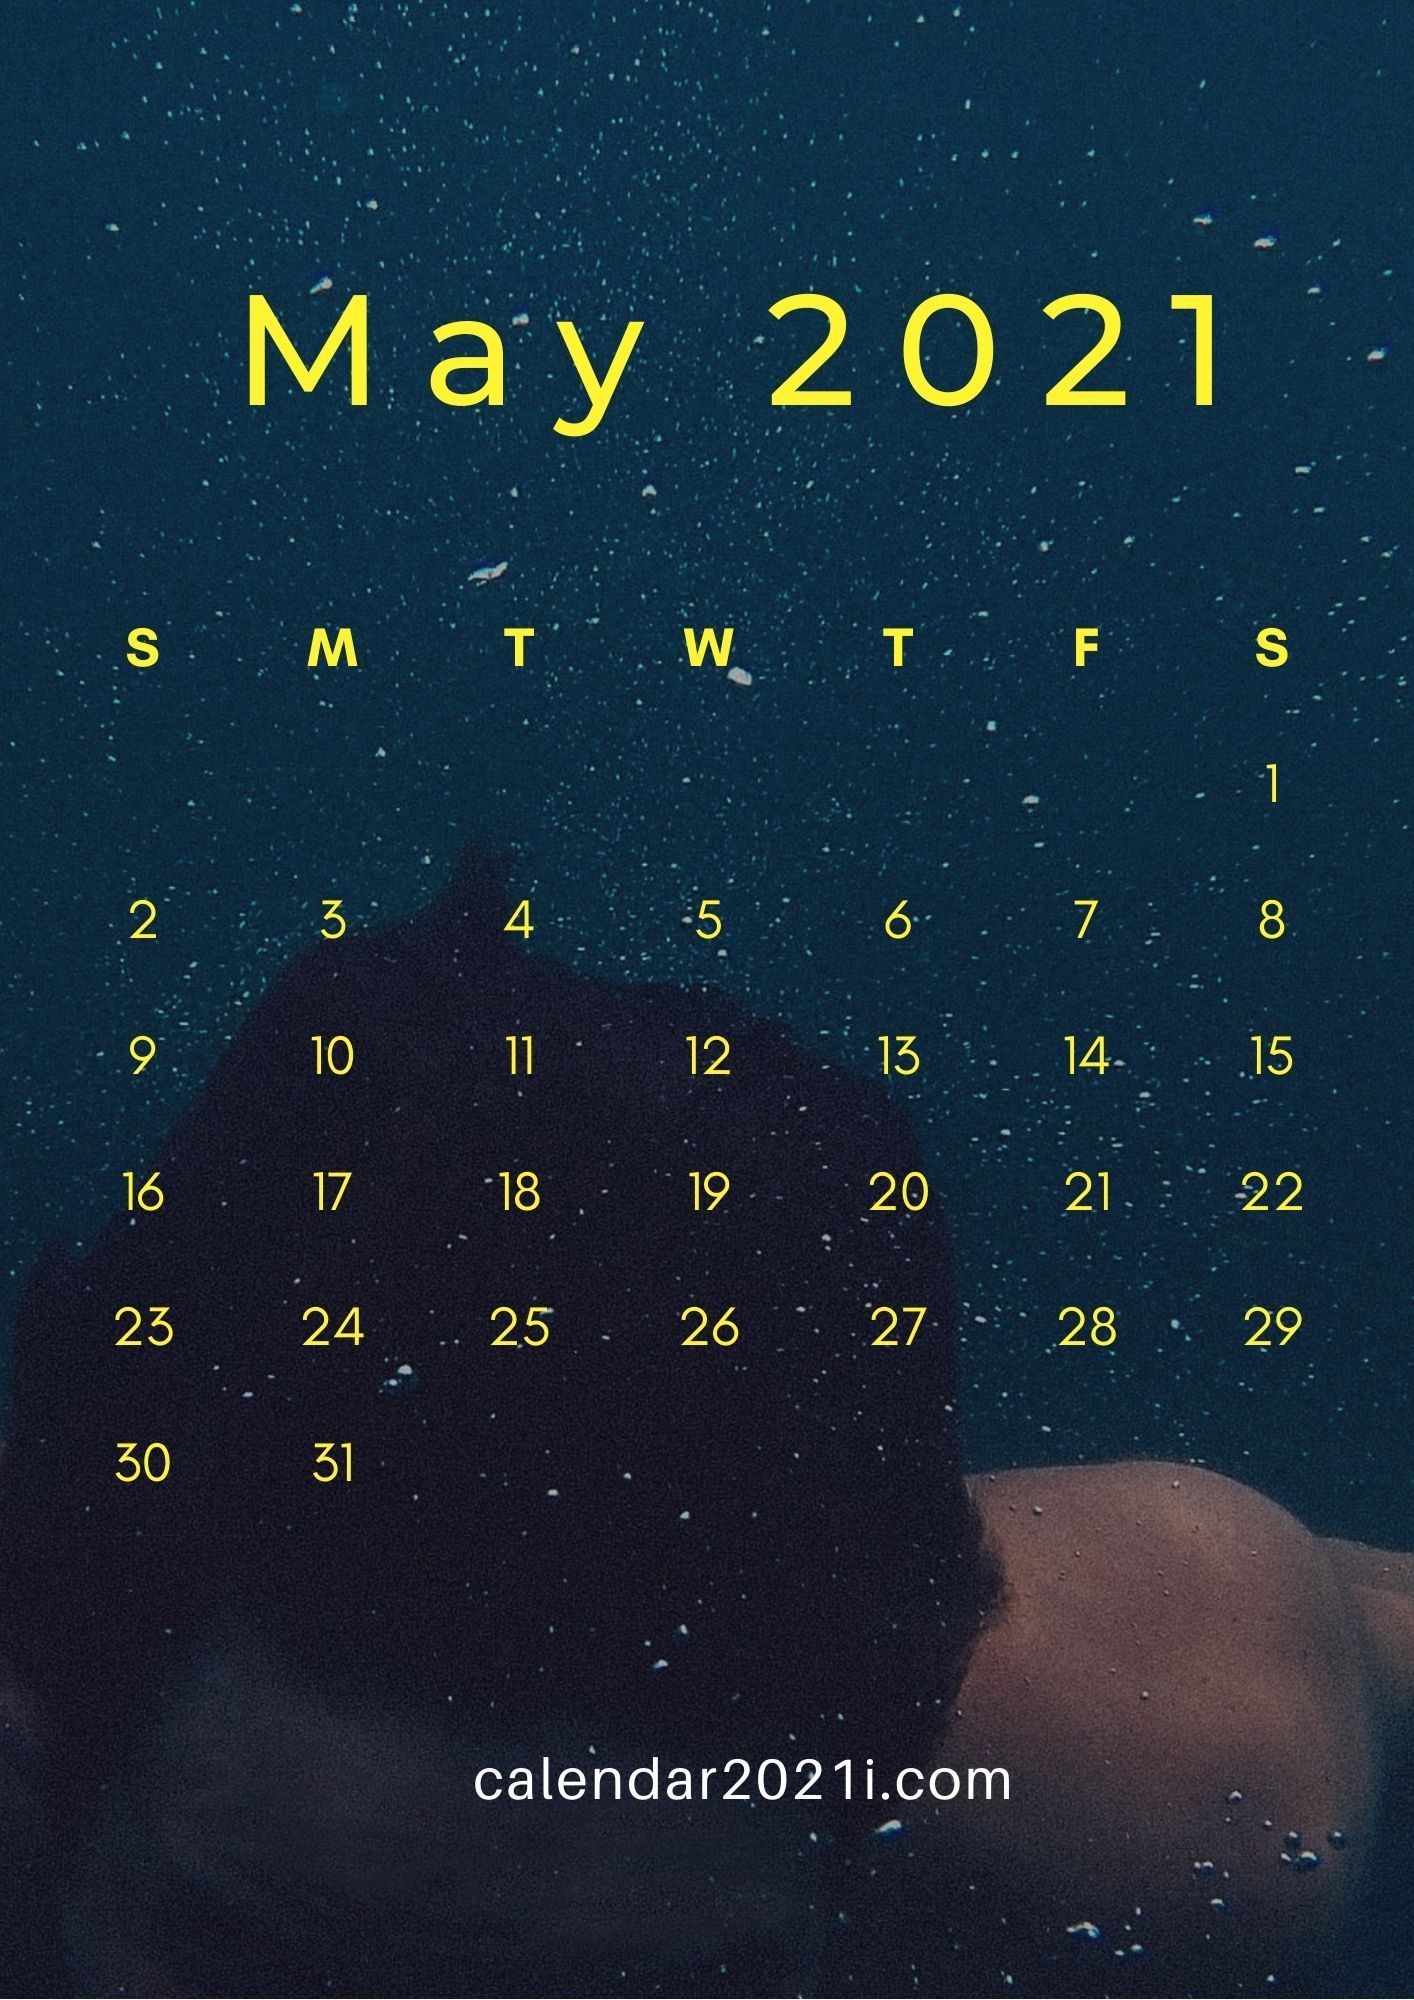 May 2021 Calendar HD iPhone Wallpaper to use as phone background screen in 2020 calendar, Calendar wallpaper, Monthly calendar